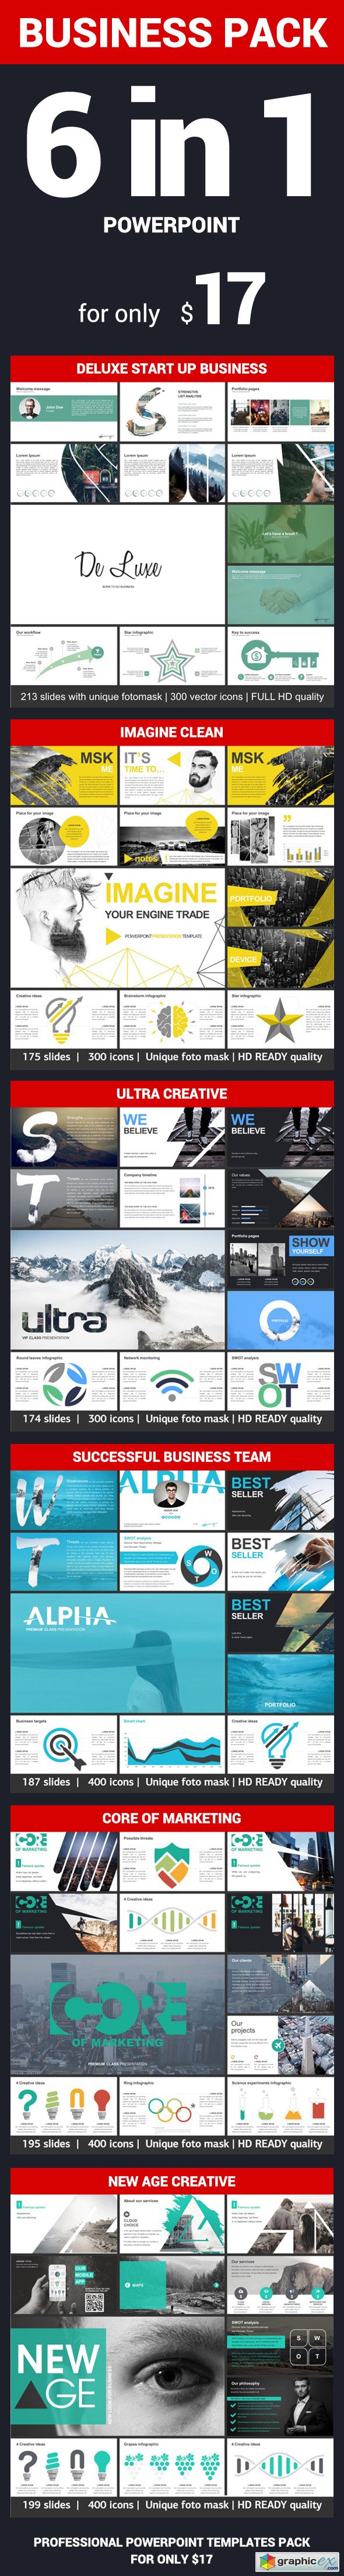 Business Pack Powerpoint